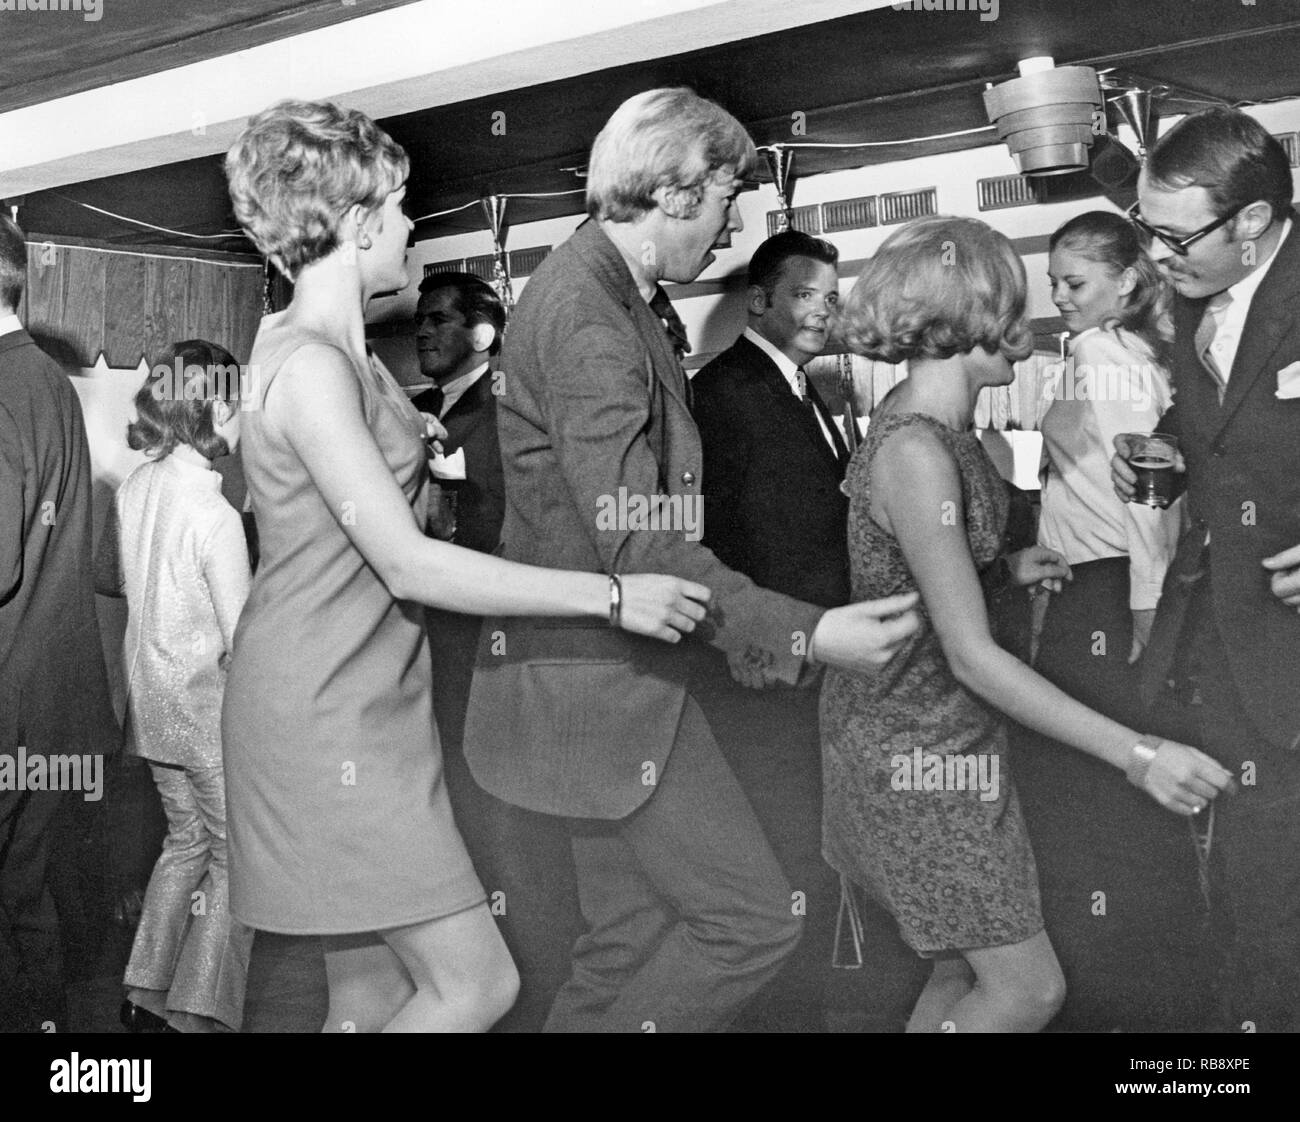 Dancing in the 1960s. The dance floor is filled with dancing couples moving to the music. Sweden 1967 Stock Photo